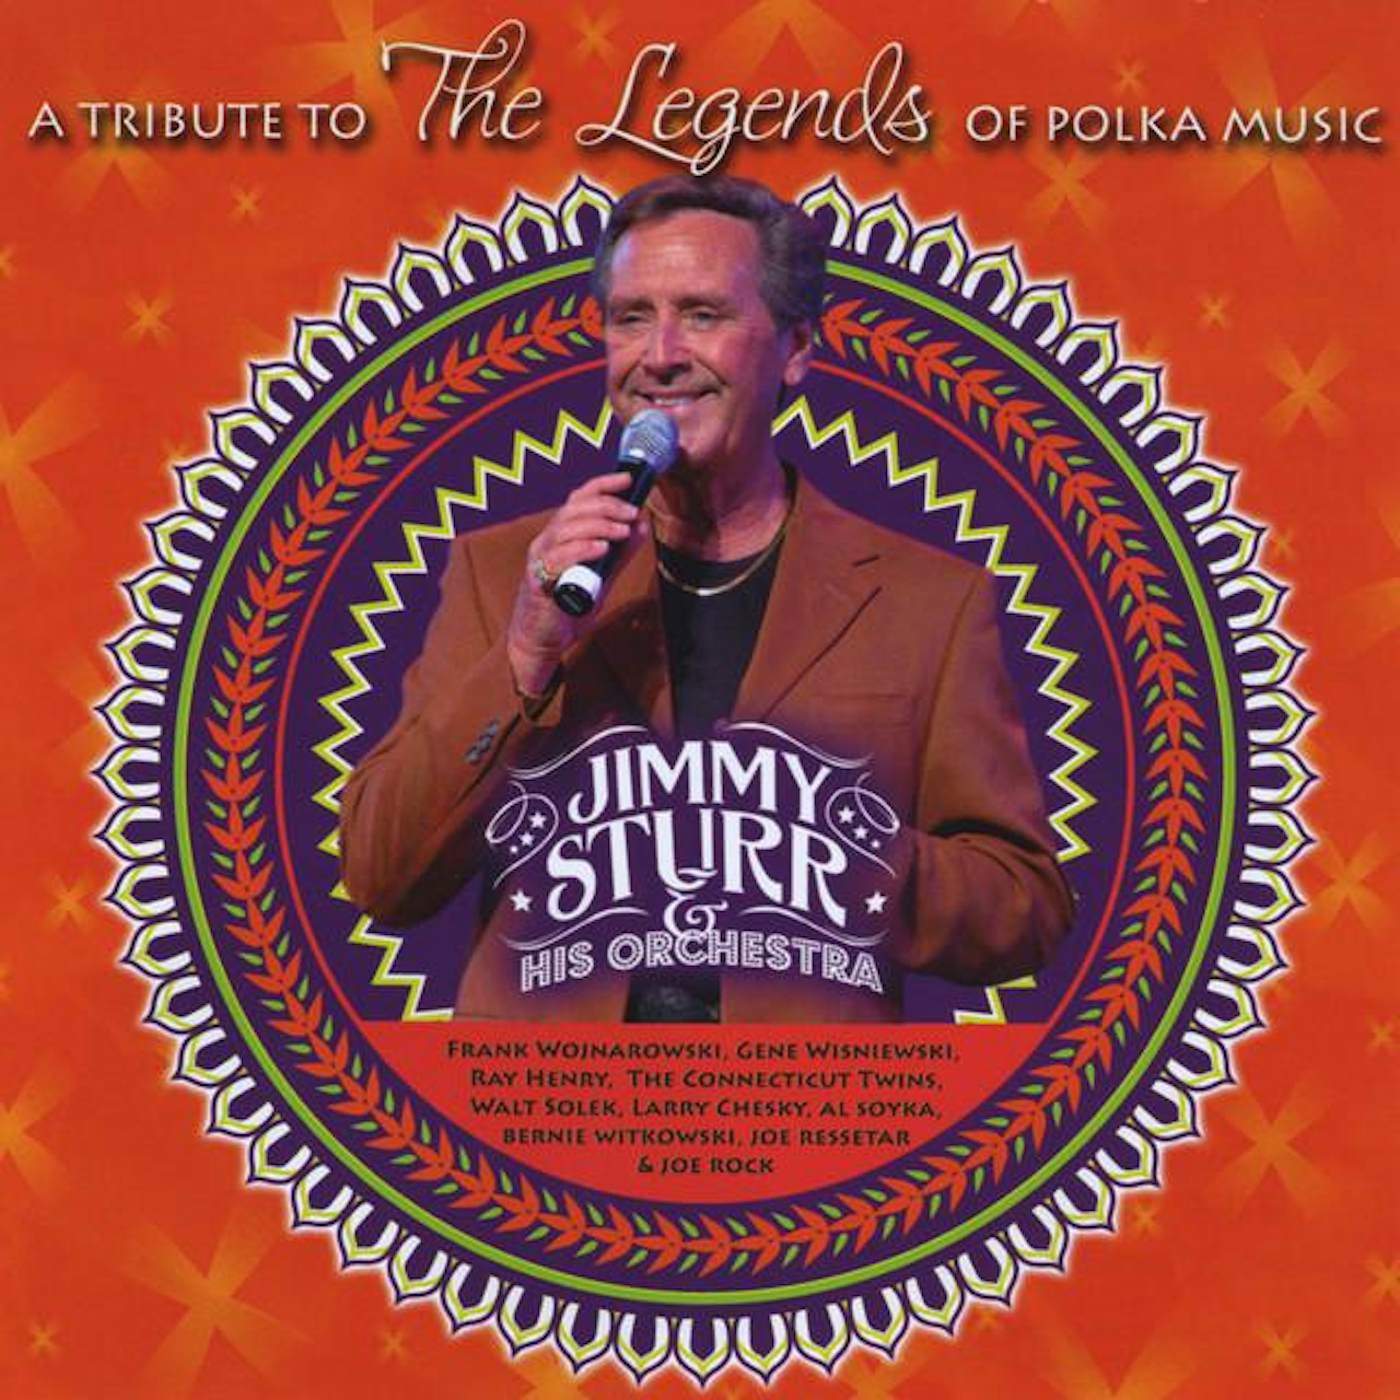 Jimmy Sturr and his Orchestra